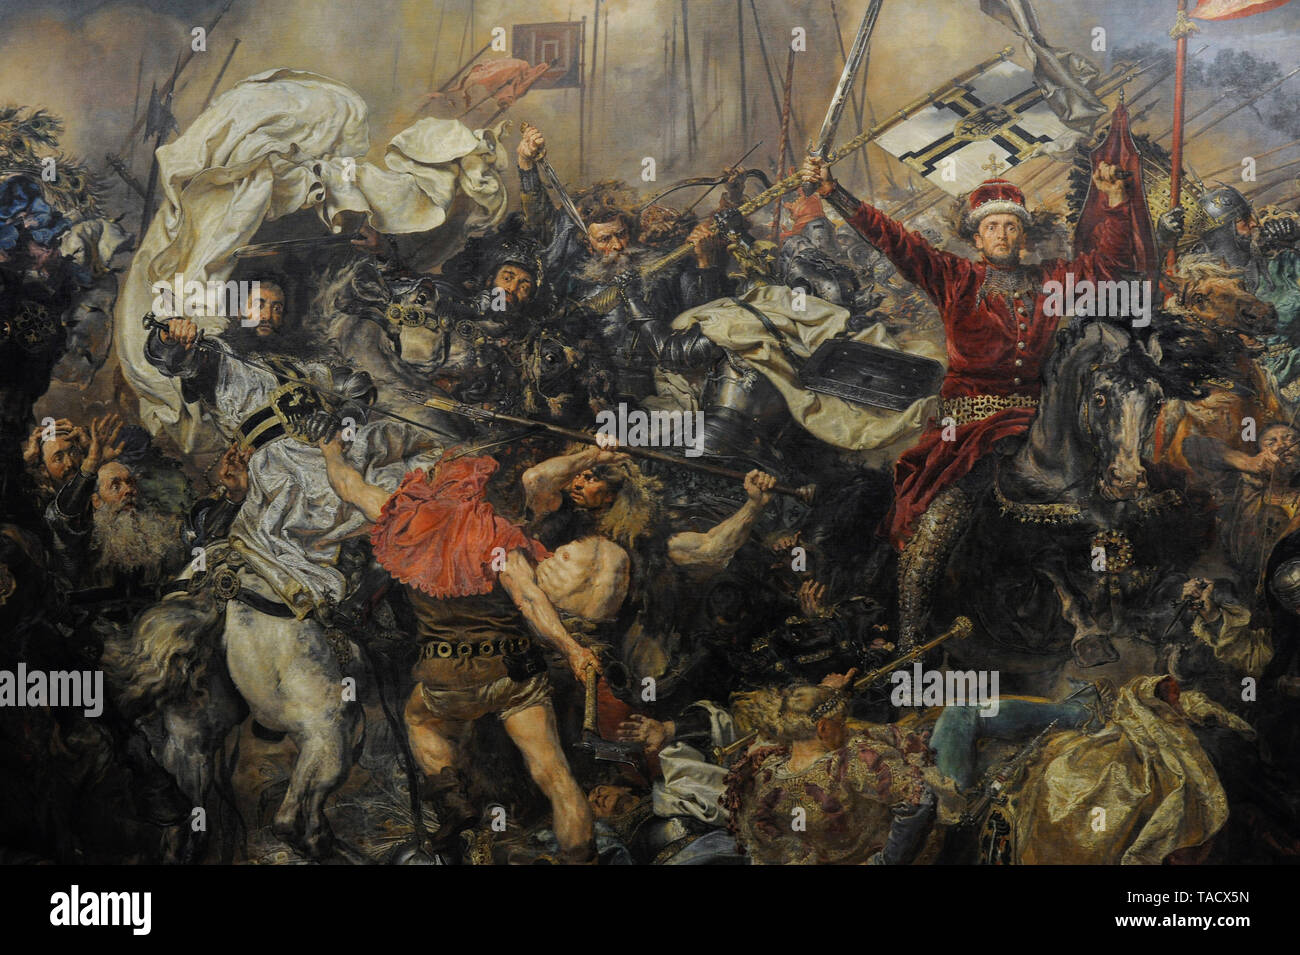 Polish-Lithuanian-Teutonic War (1409-1411). Conflict between Kingdom of Poland and Grand Duchy of Lithuania against the Teutonic Knights. Painting depicting the Battle of Grunwald (Tannenberg) (15 July, 1410), 1878, by Jan Matejko (1838-1893). Detail, Vytautas the Great (1350-1430) Grand Duke of Lithuania. National Museum. Warsaw. Poland. Stock Photo